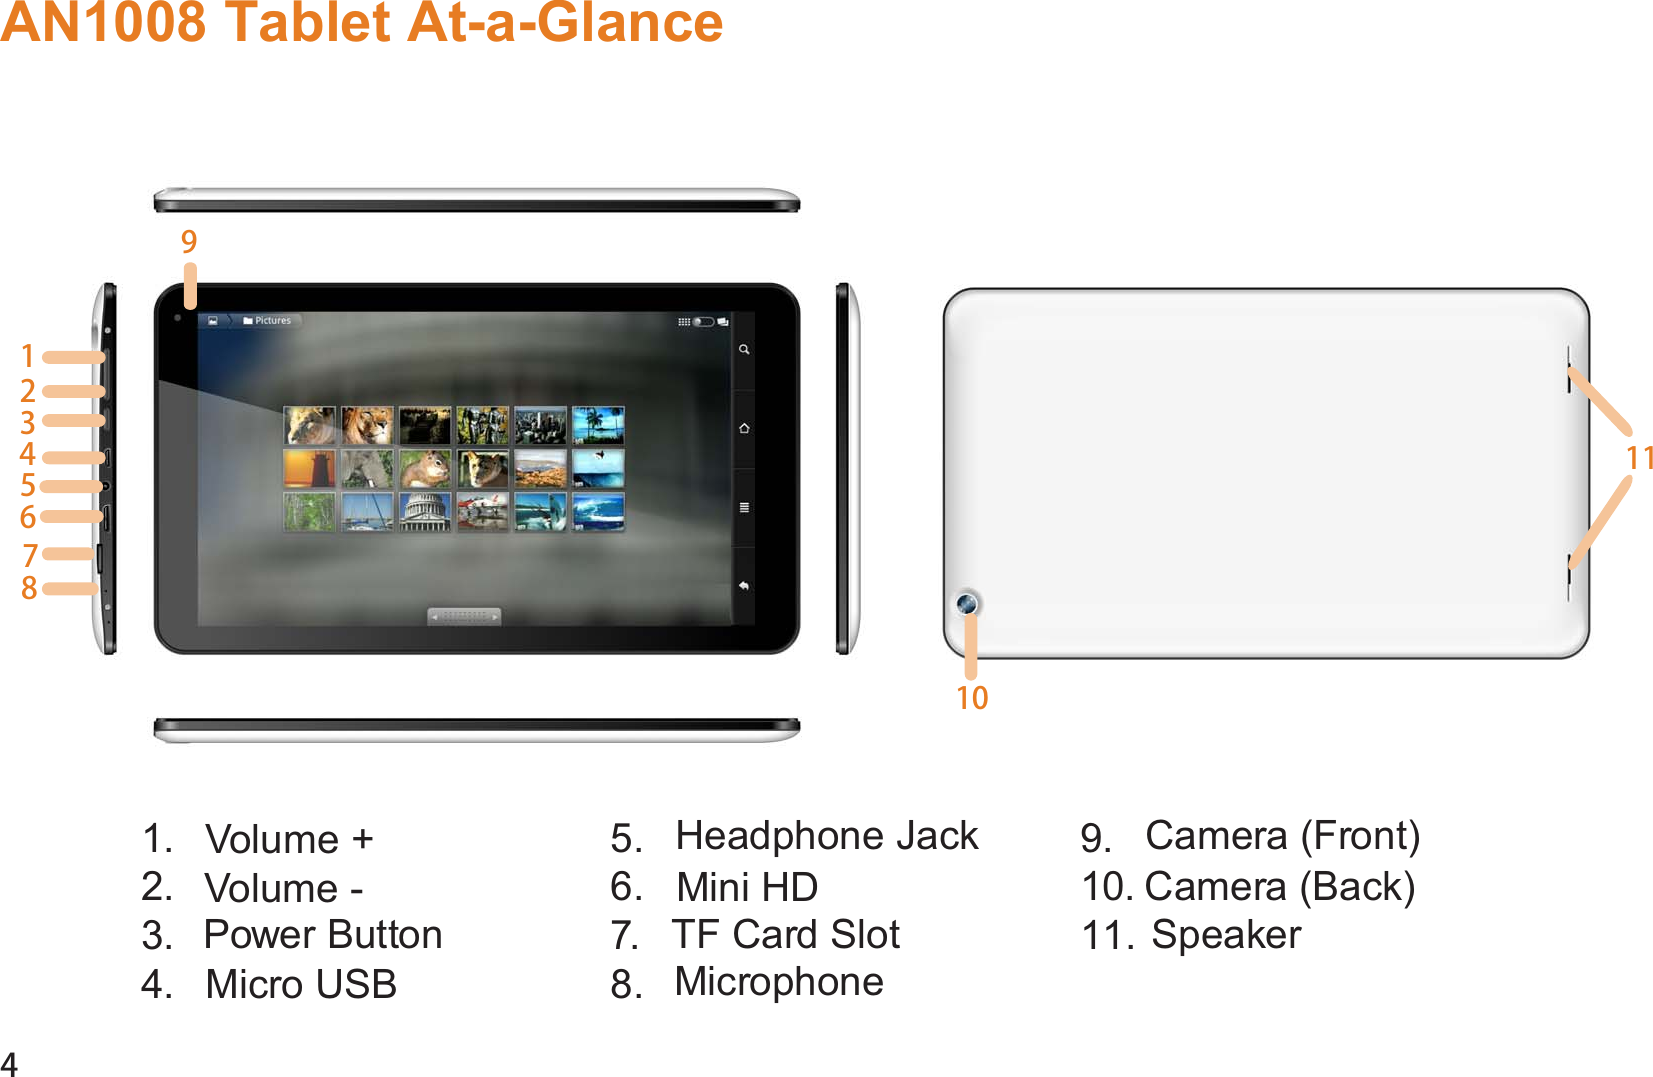 4AN1008 Tablet At-a-Glance1.  Speaker 2.   Camera (Back) 3. Mini HD 4.  Micro USB 5.  6.  Headphone Jack7. Power Button8.  Volume +  9. Volume - 10. TF Card Slot  11.  Microphone214     367 Camera (Front)1110985